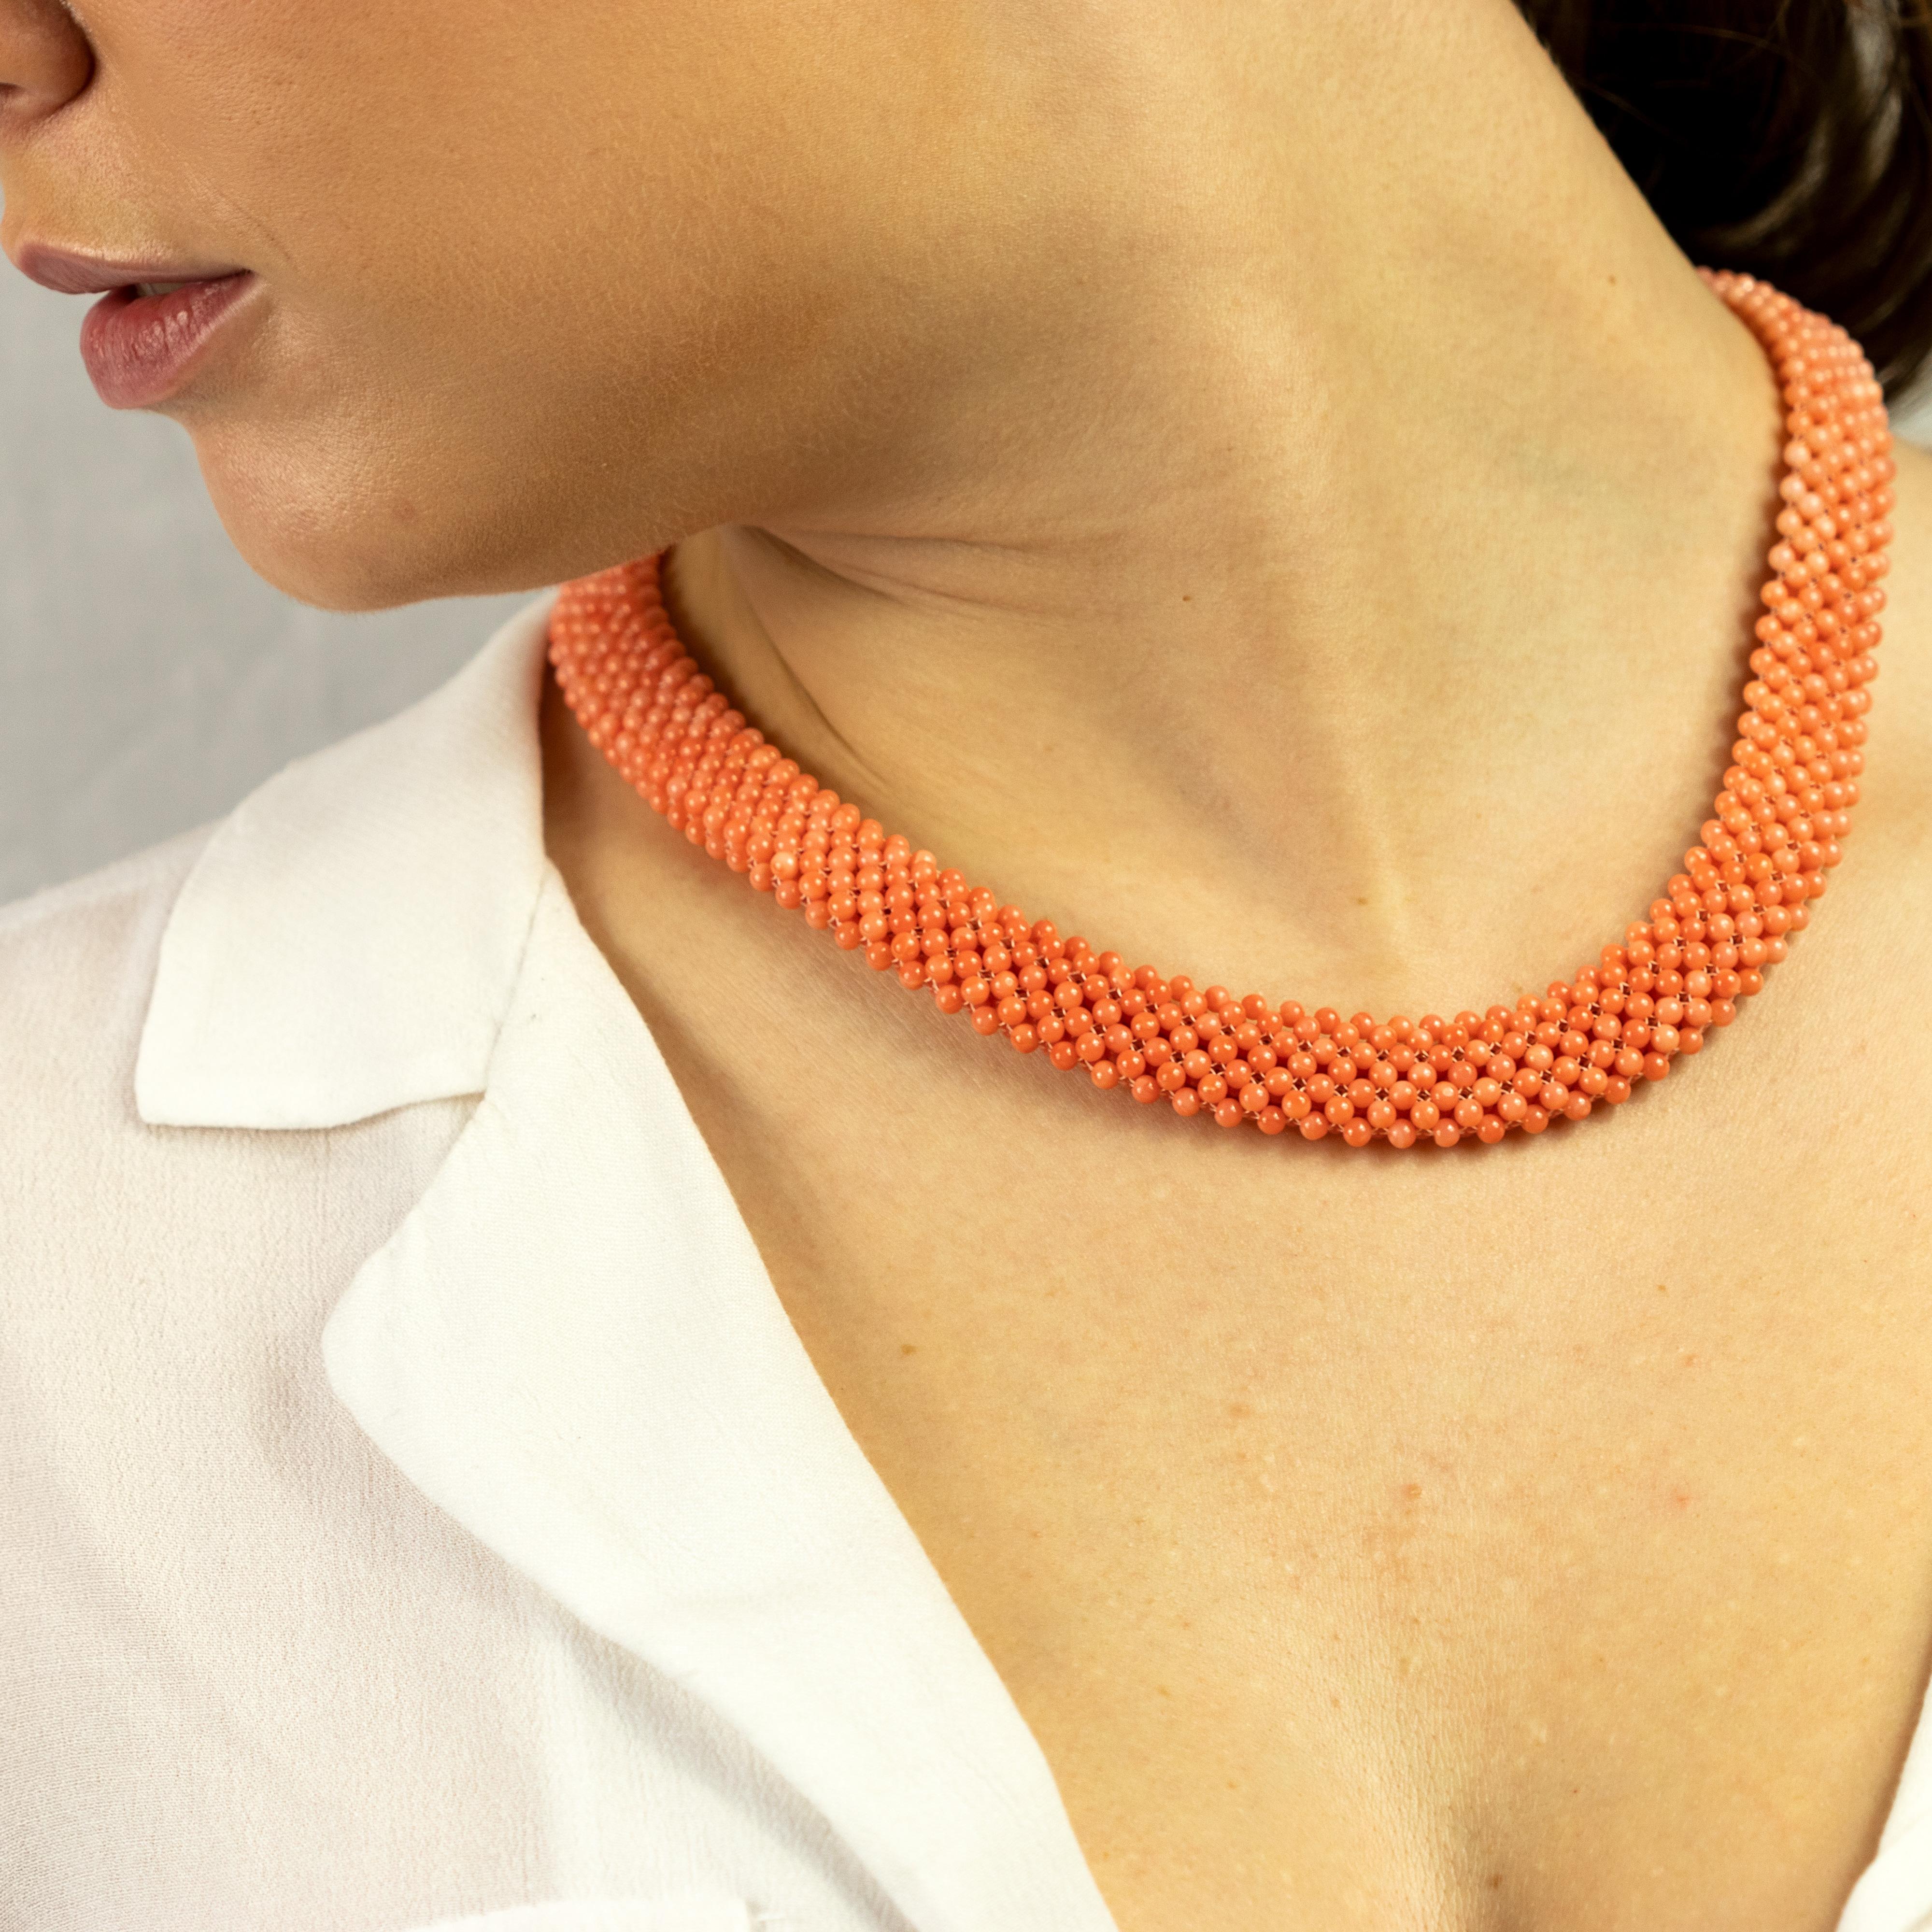 This classy and fashionable pink coral princess necklace is inspired in a soft look. For a simple and elegant woman not afraid of color and uniqueness. With a touch of modernity and natural bright through the coral woven that interlocks tube and